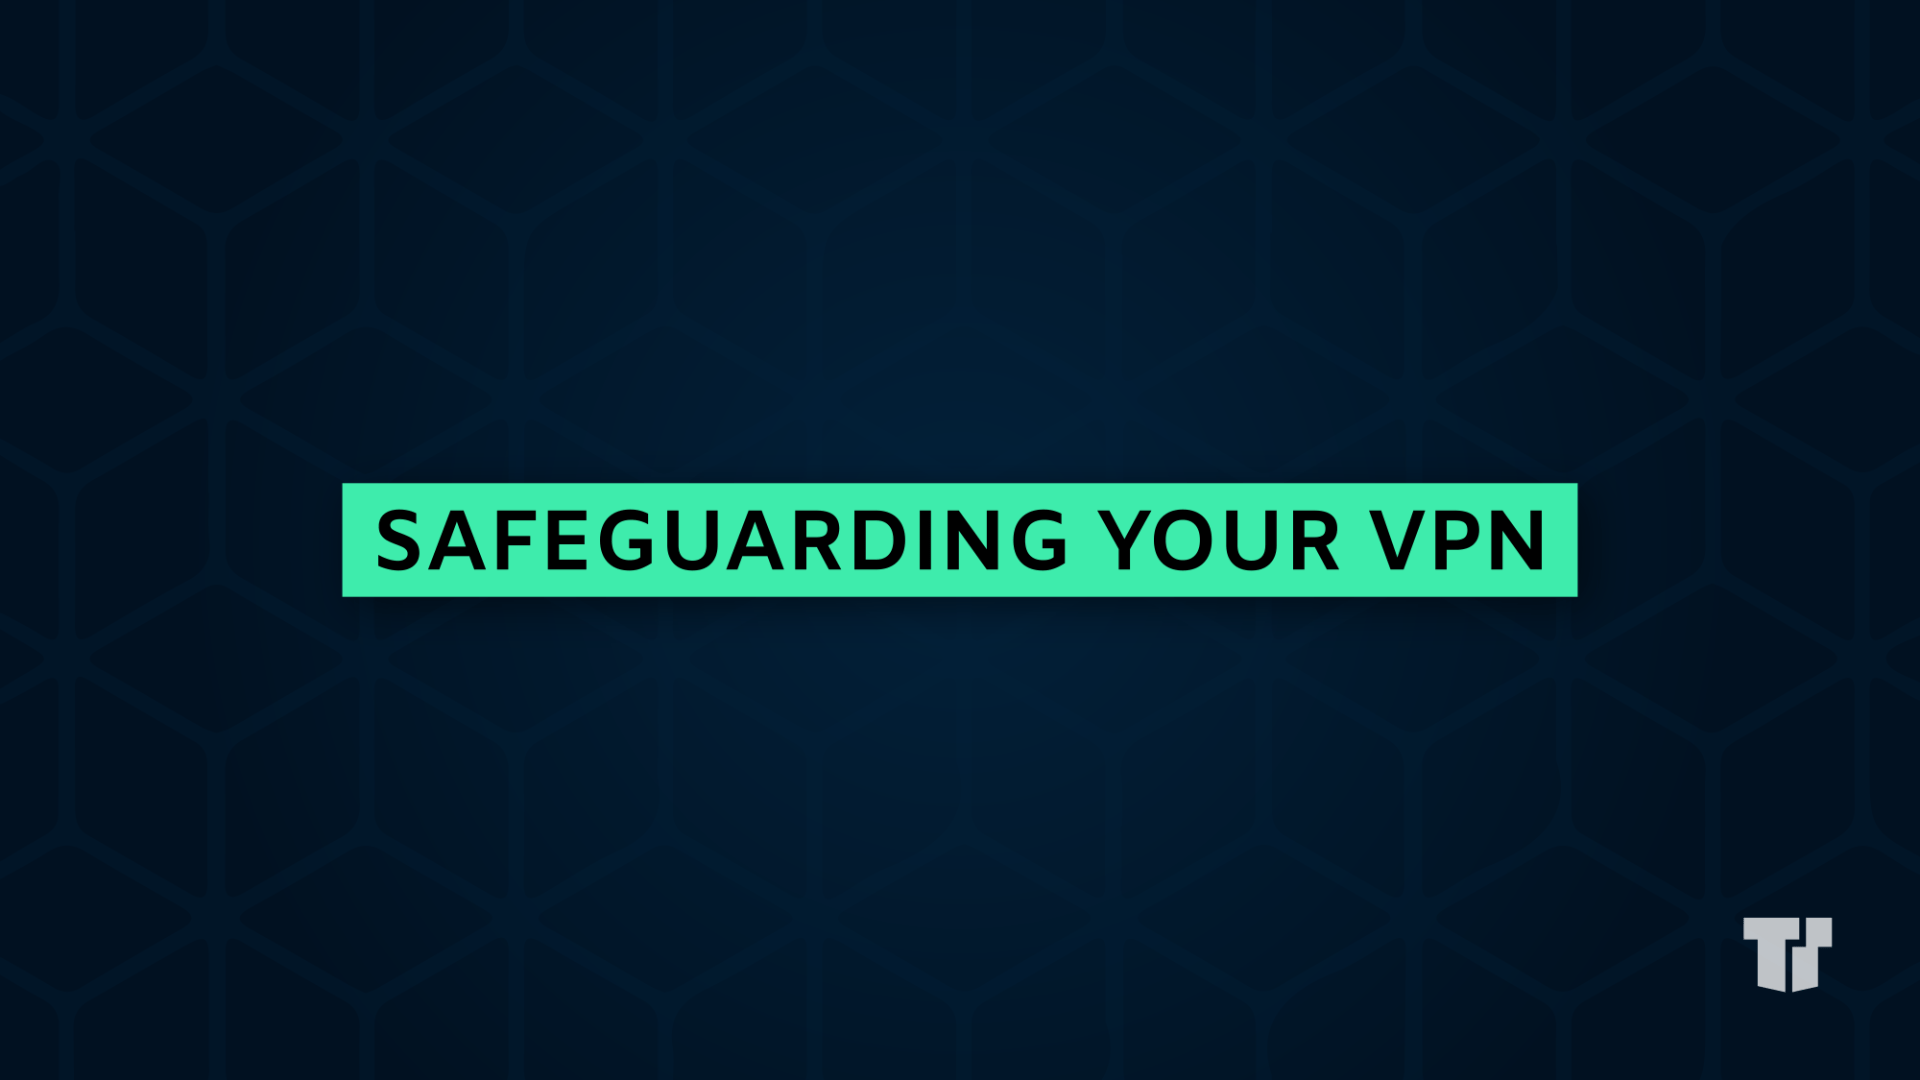 Safeguarding your VPN cover image